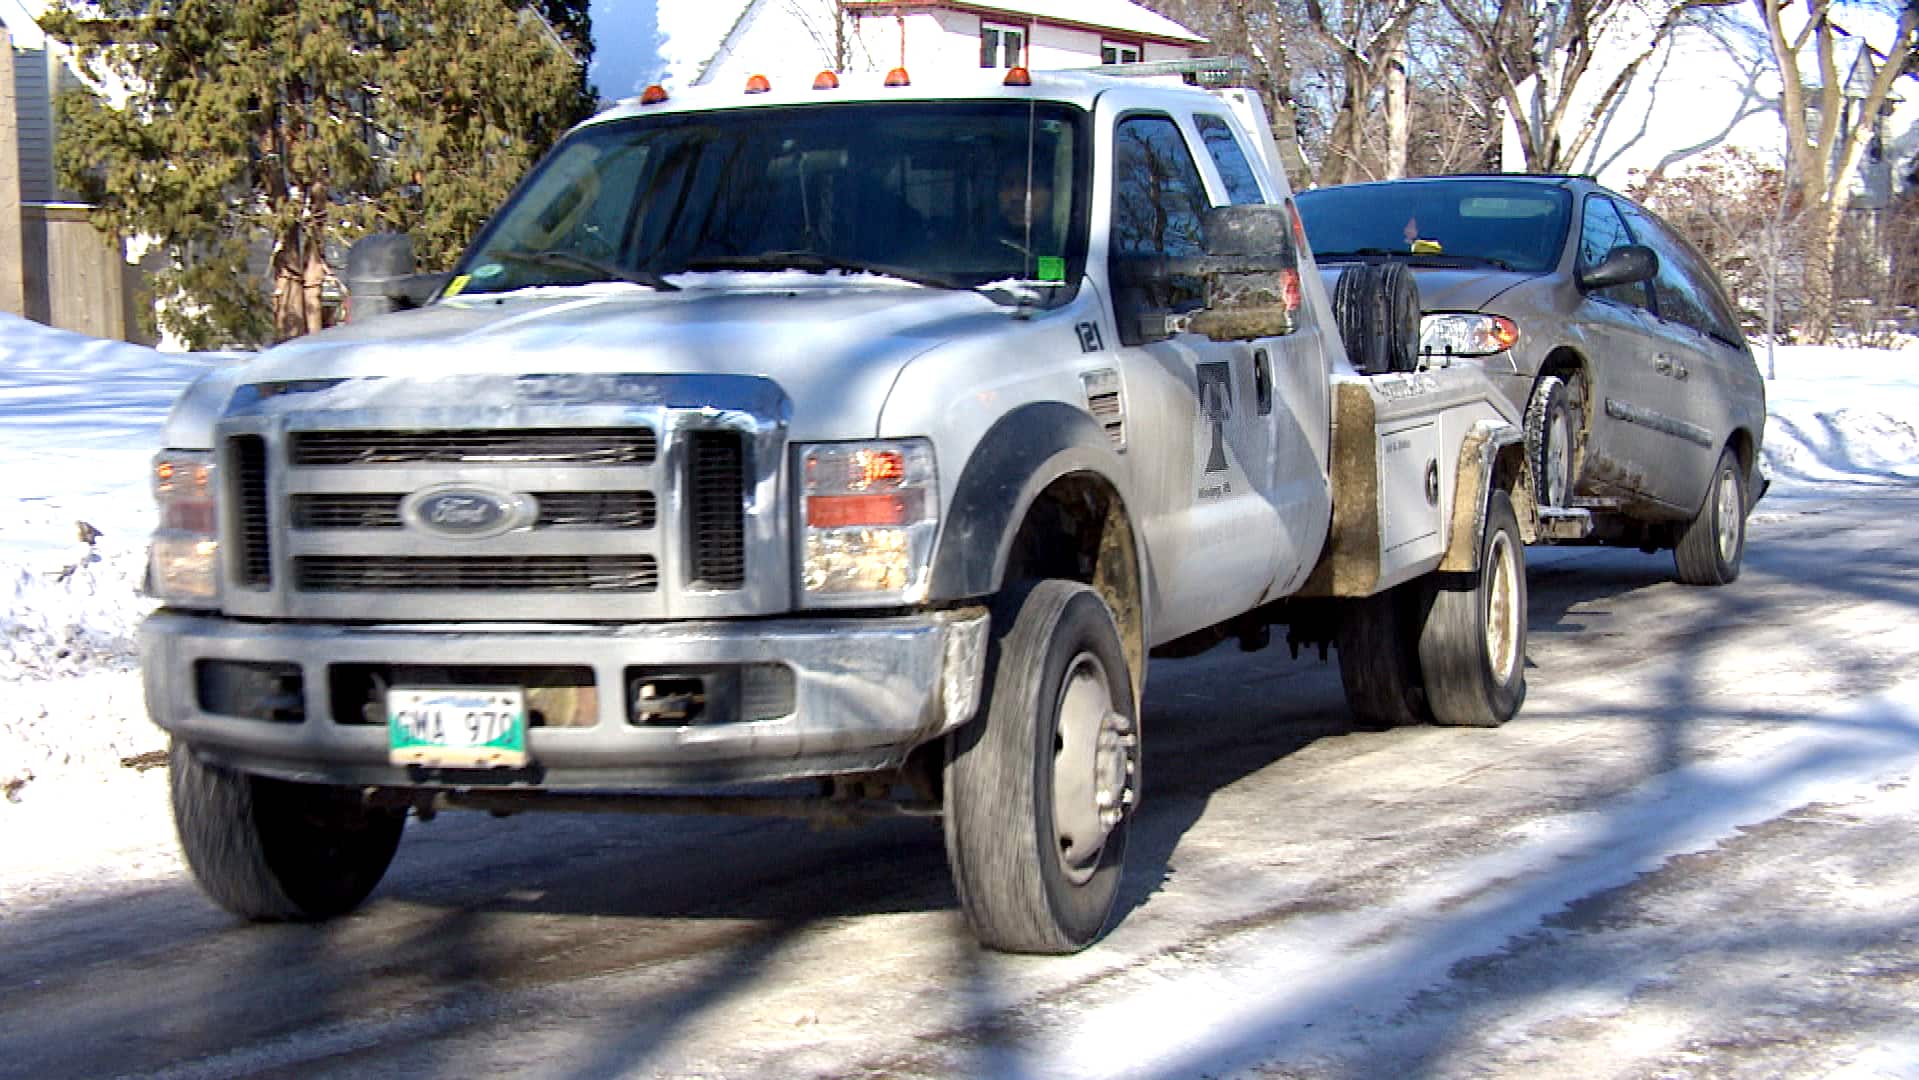 Winnipeg towing company charges city .1M for tows that never happened, report claims